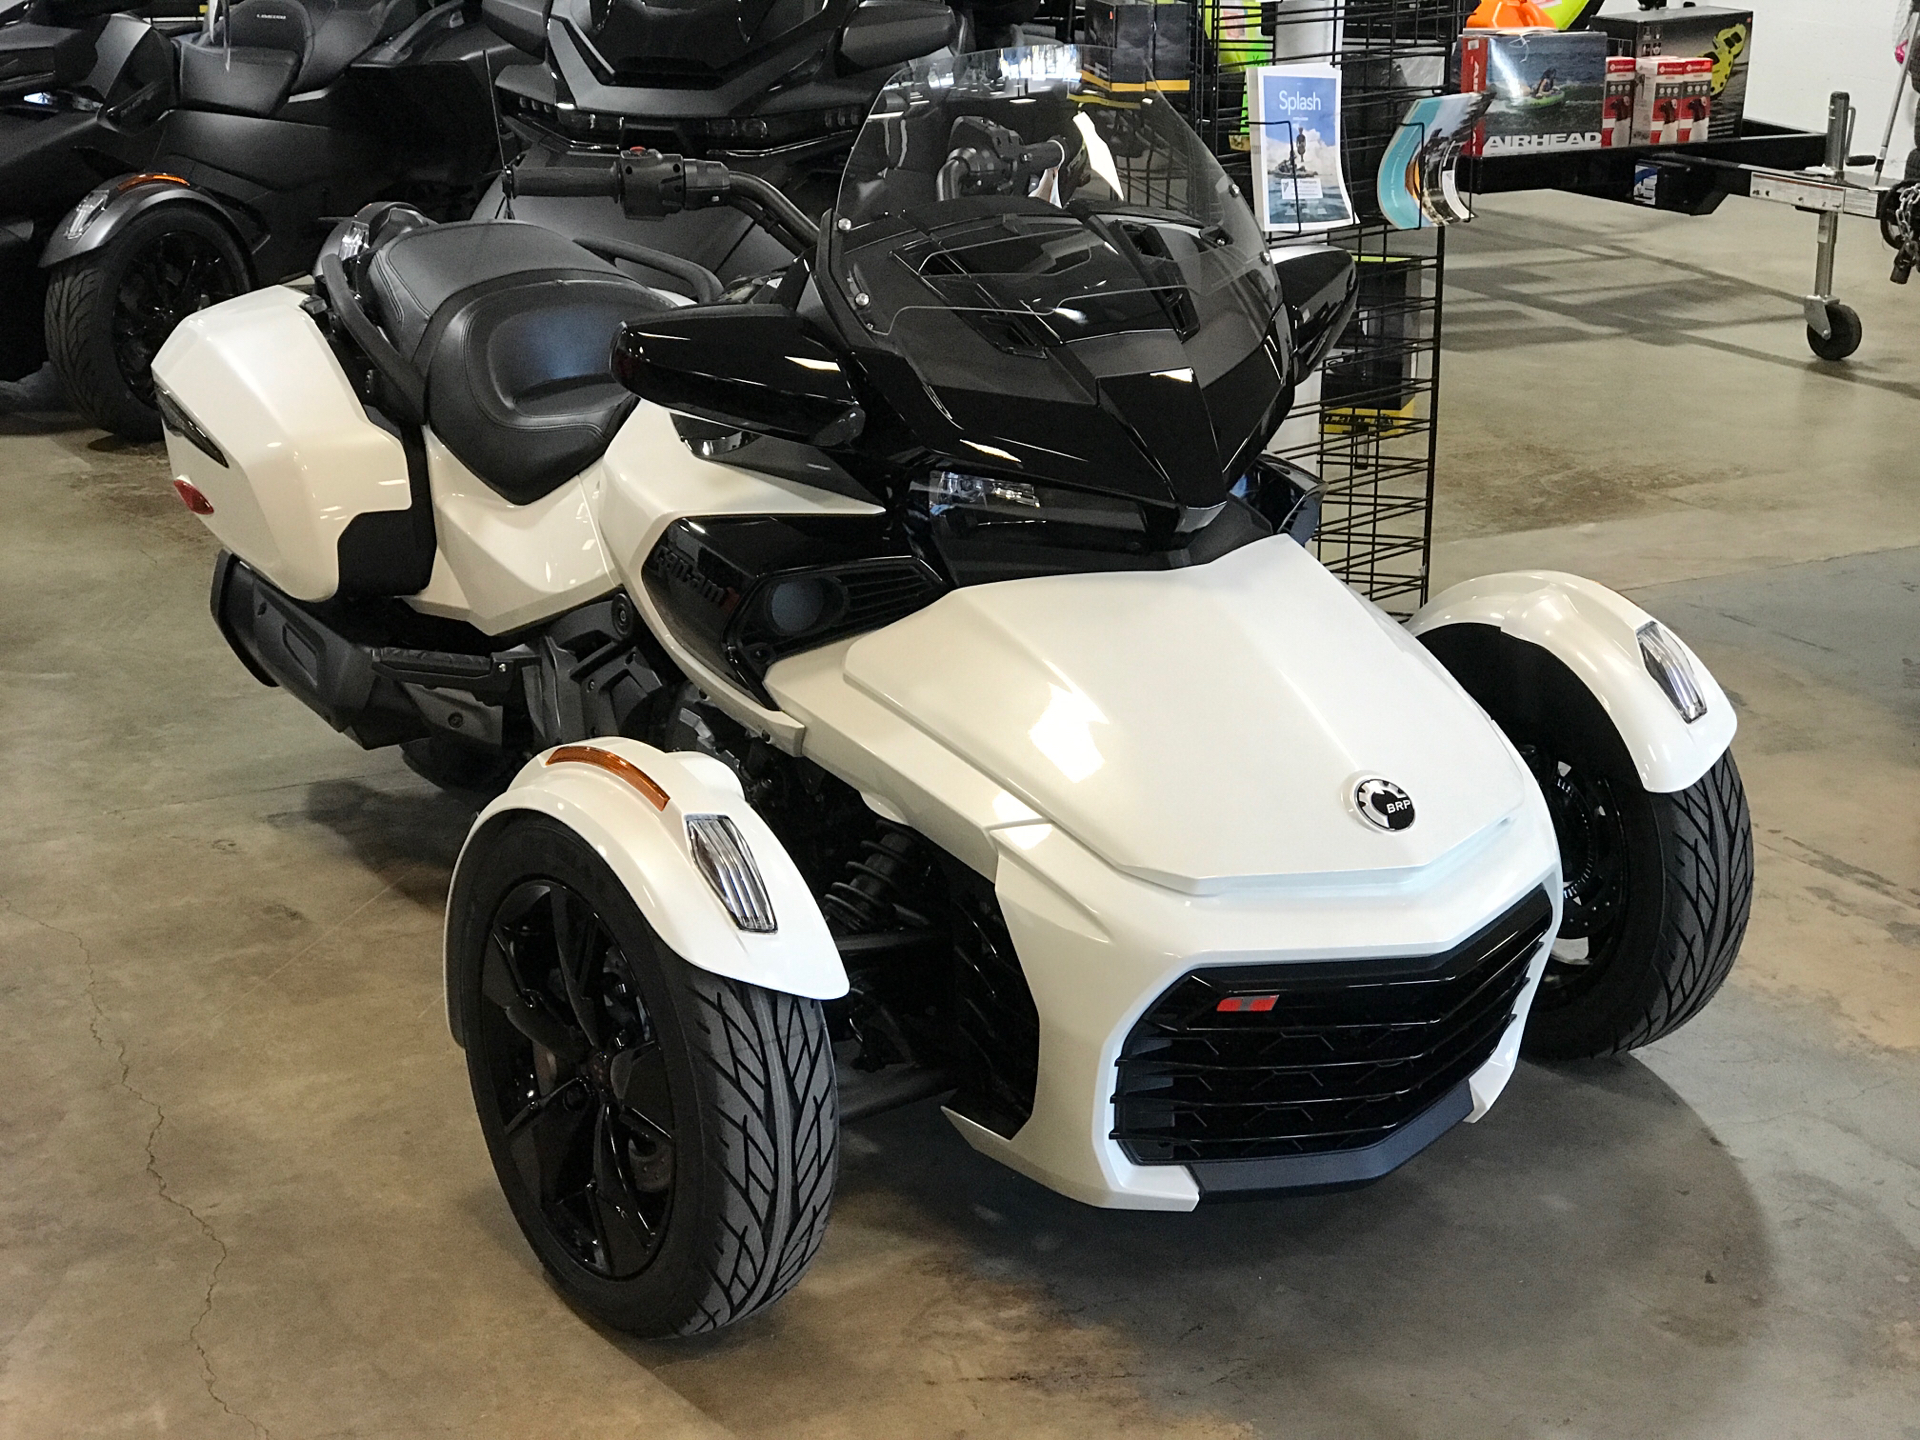 2022 Can-Am Spyder F3-T in Eugene, Oregon - Photo 1